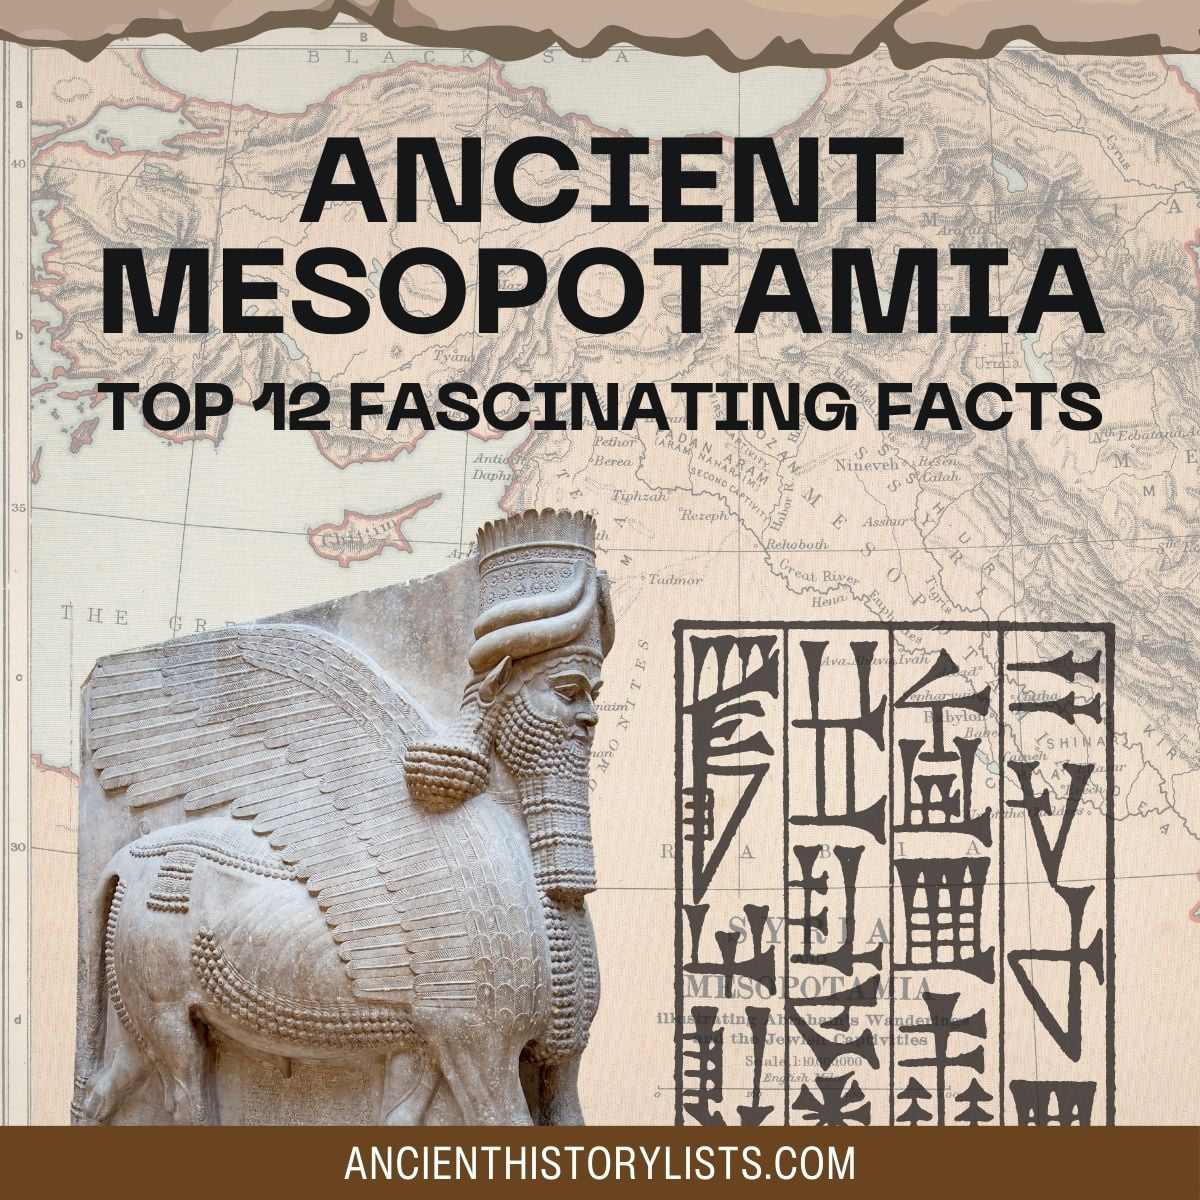 Facts about Ancient Mesopotamia